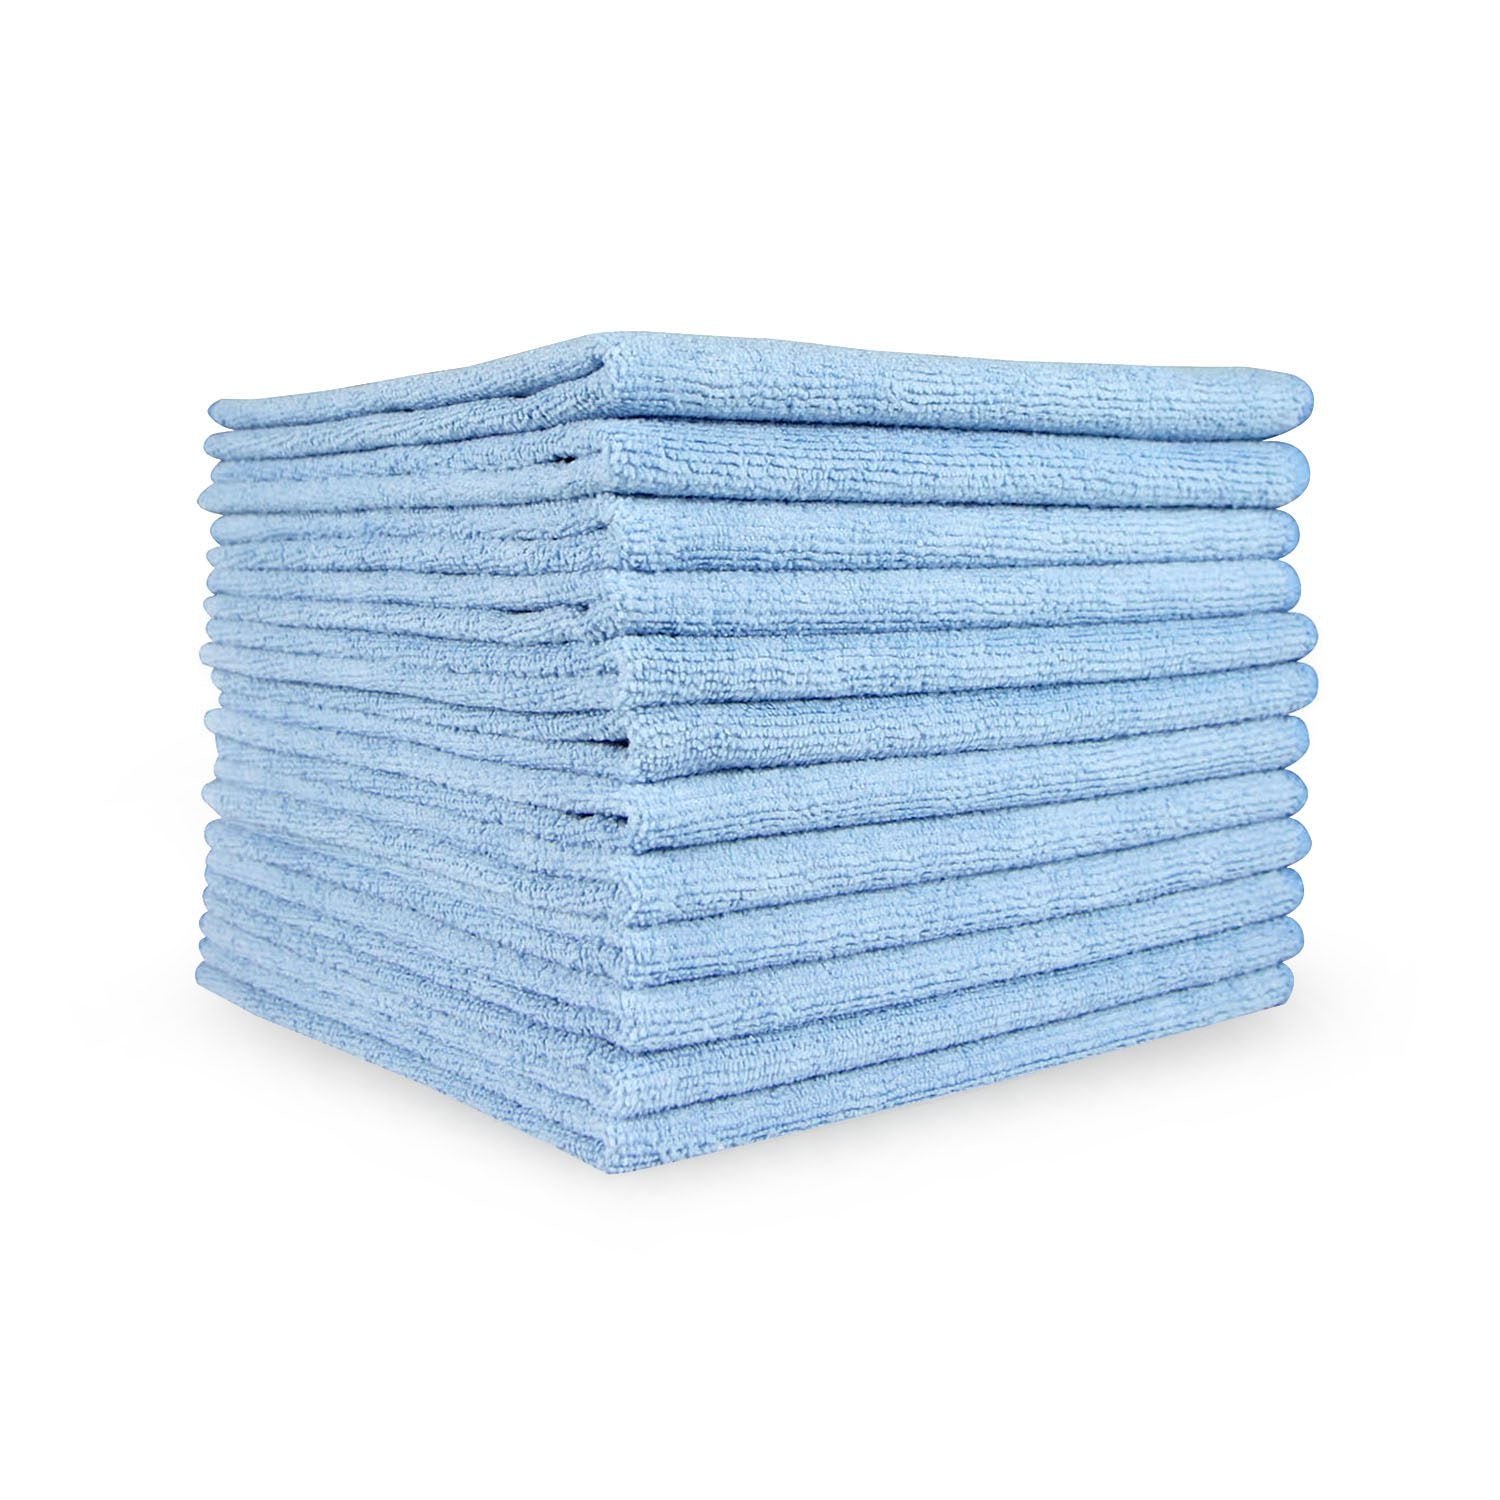 a stack of blue microfiber towels